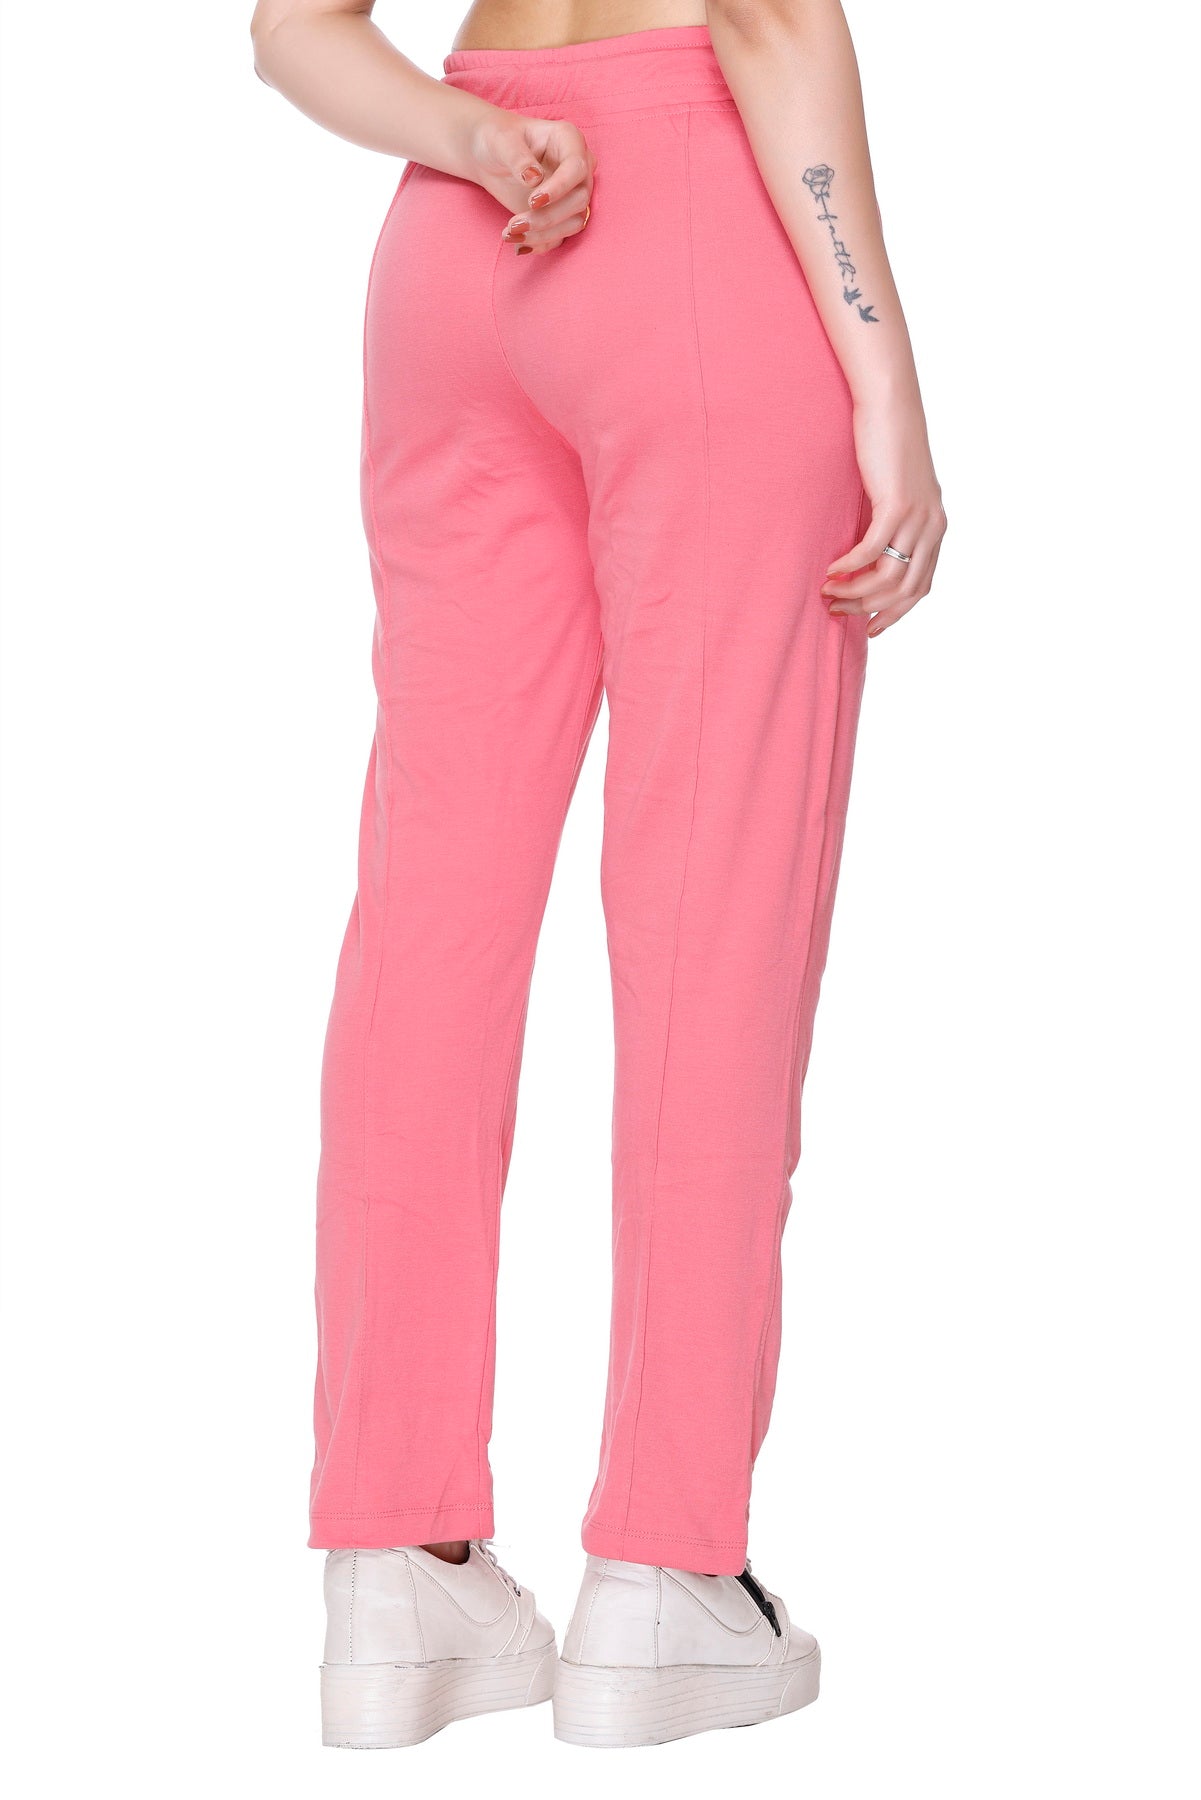 TINTED Track Pants  Buy TINTED Bottle Green Solid High Waist Track Pant  Online  Nykaa Fashion